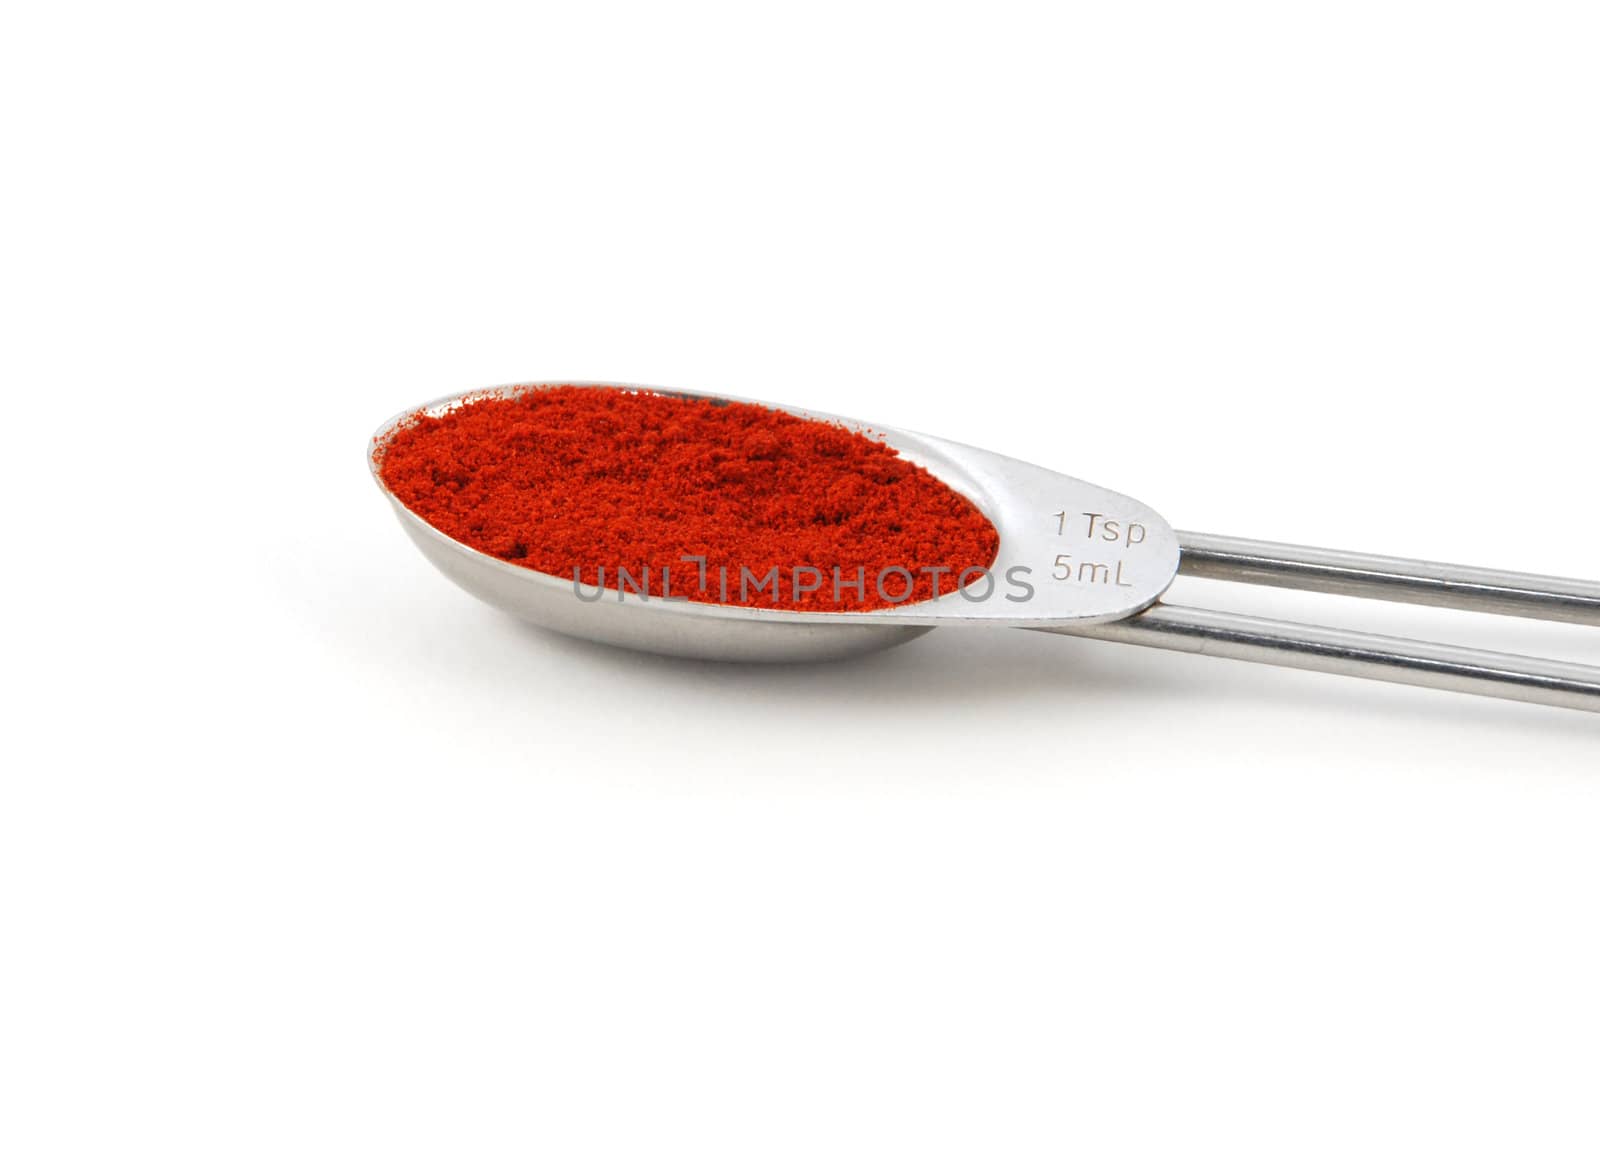 Smoked paprika powder measured in a metal teaspoon, isolated on a white background